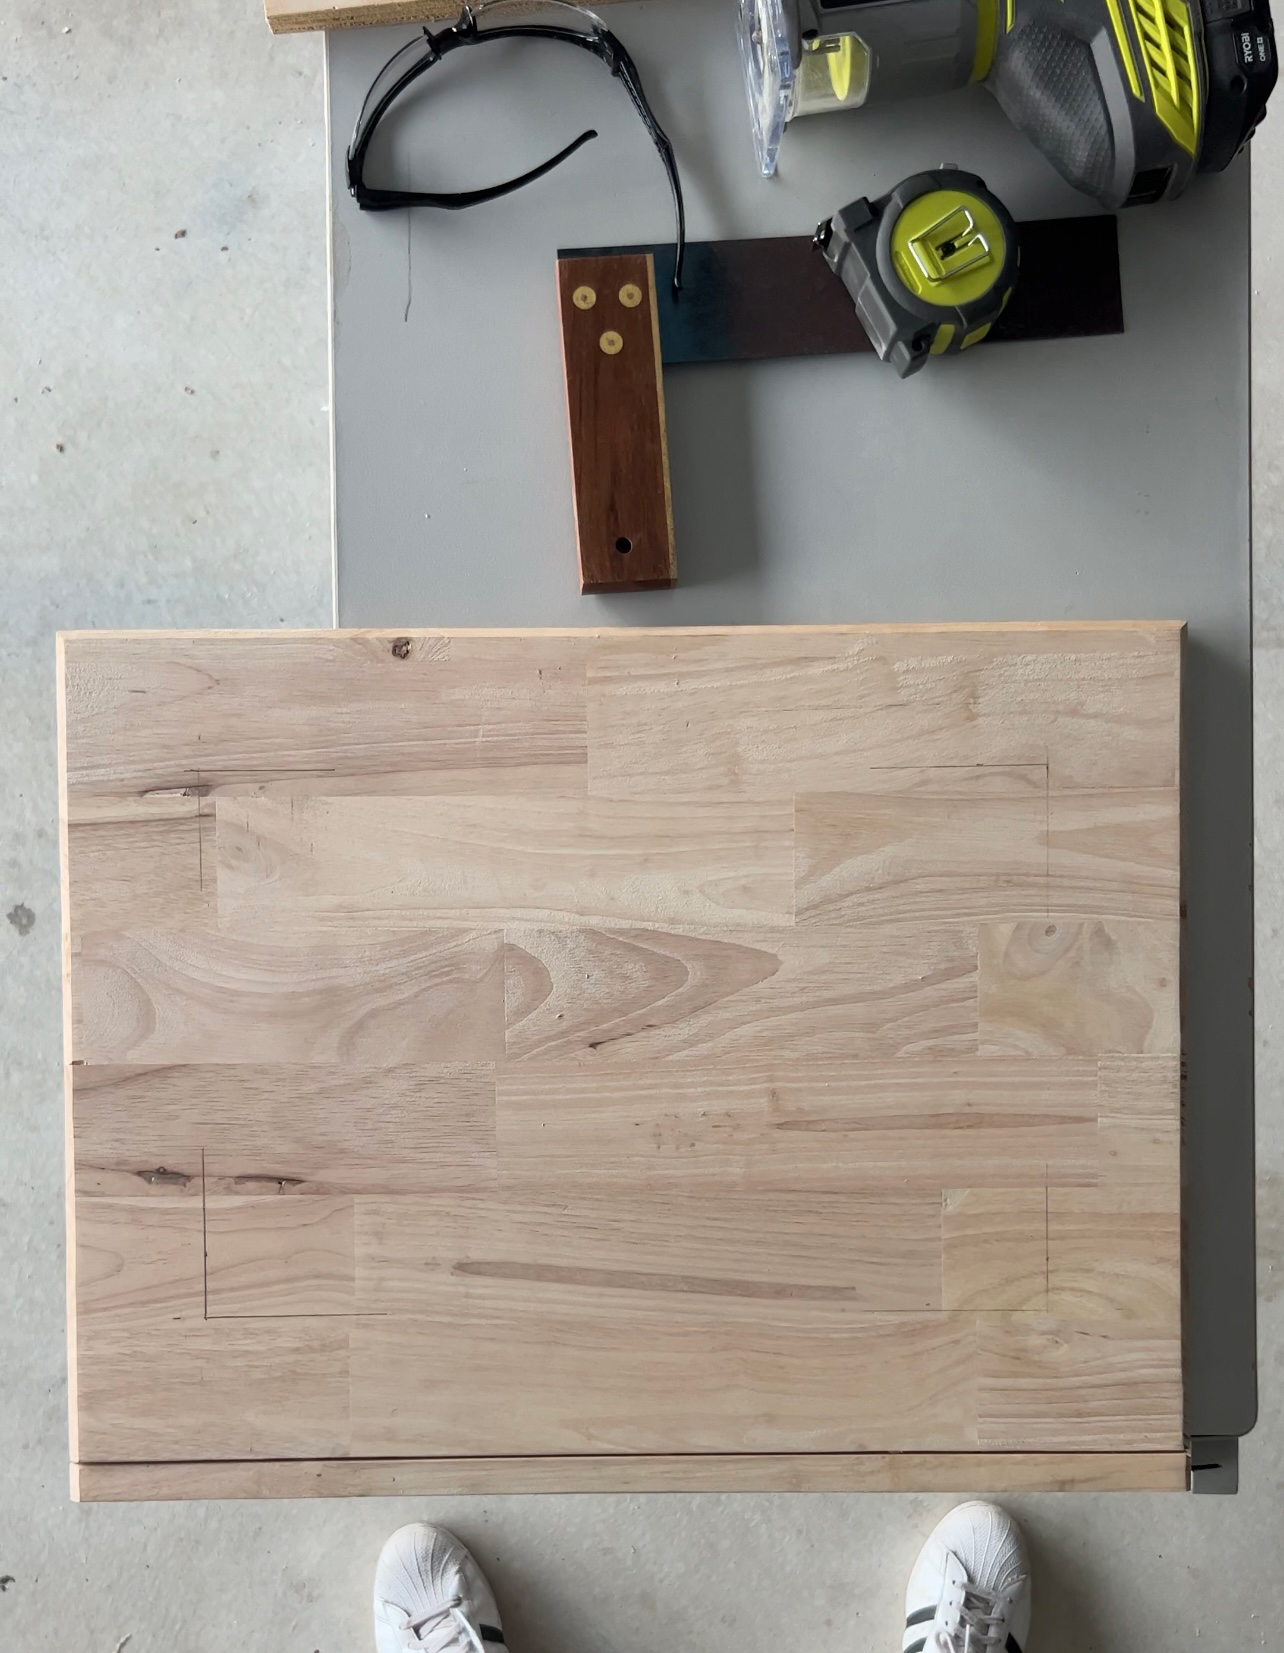 Slab of wood with markings for router